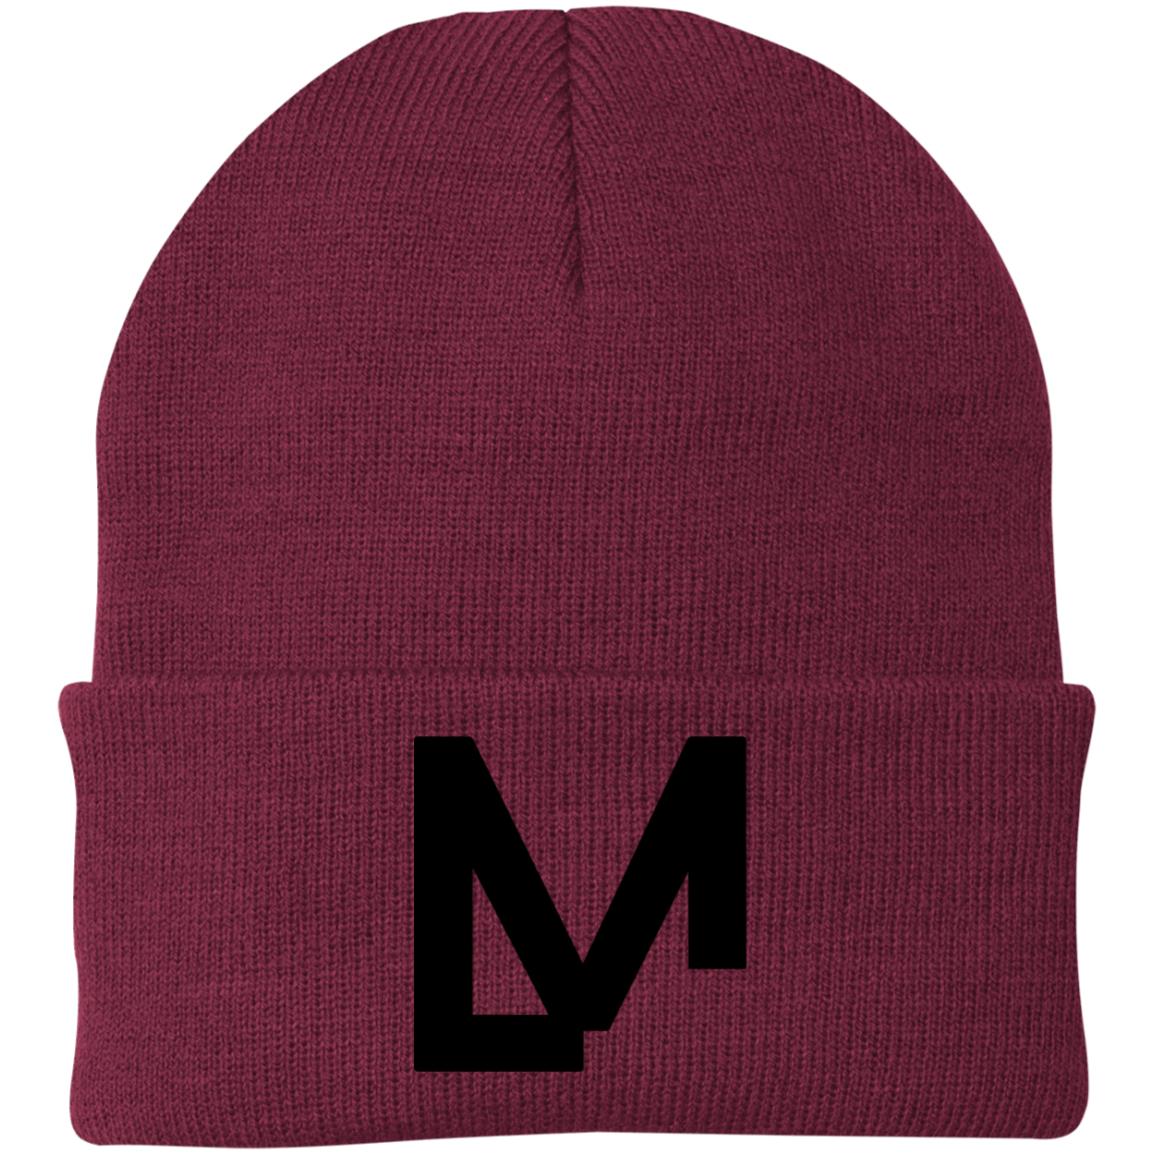 LM Embroidered Knit Cap